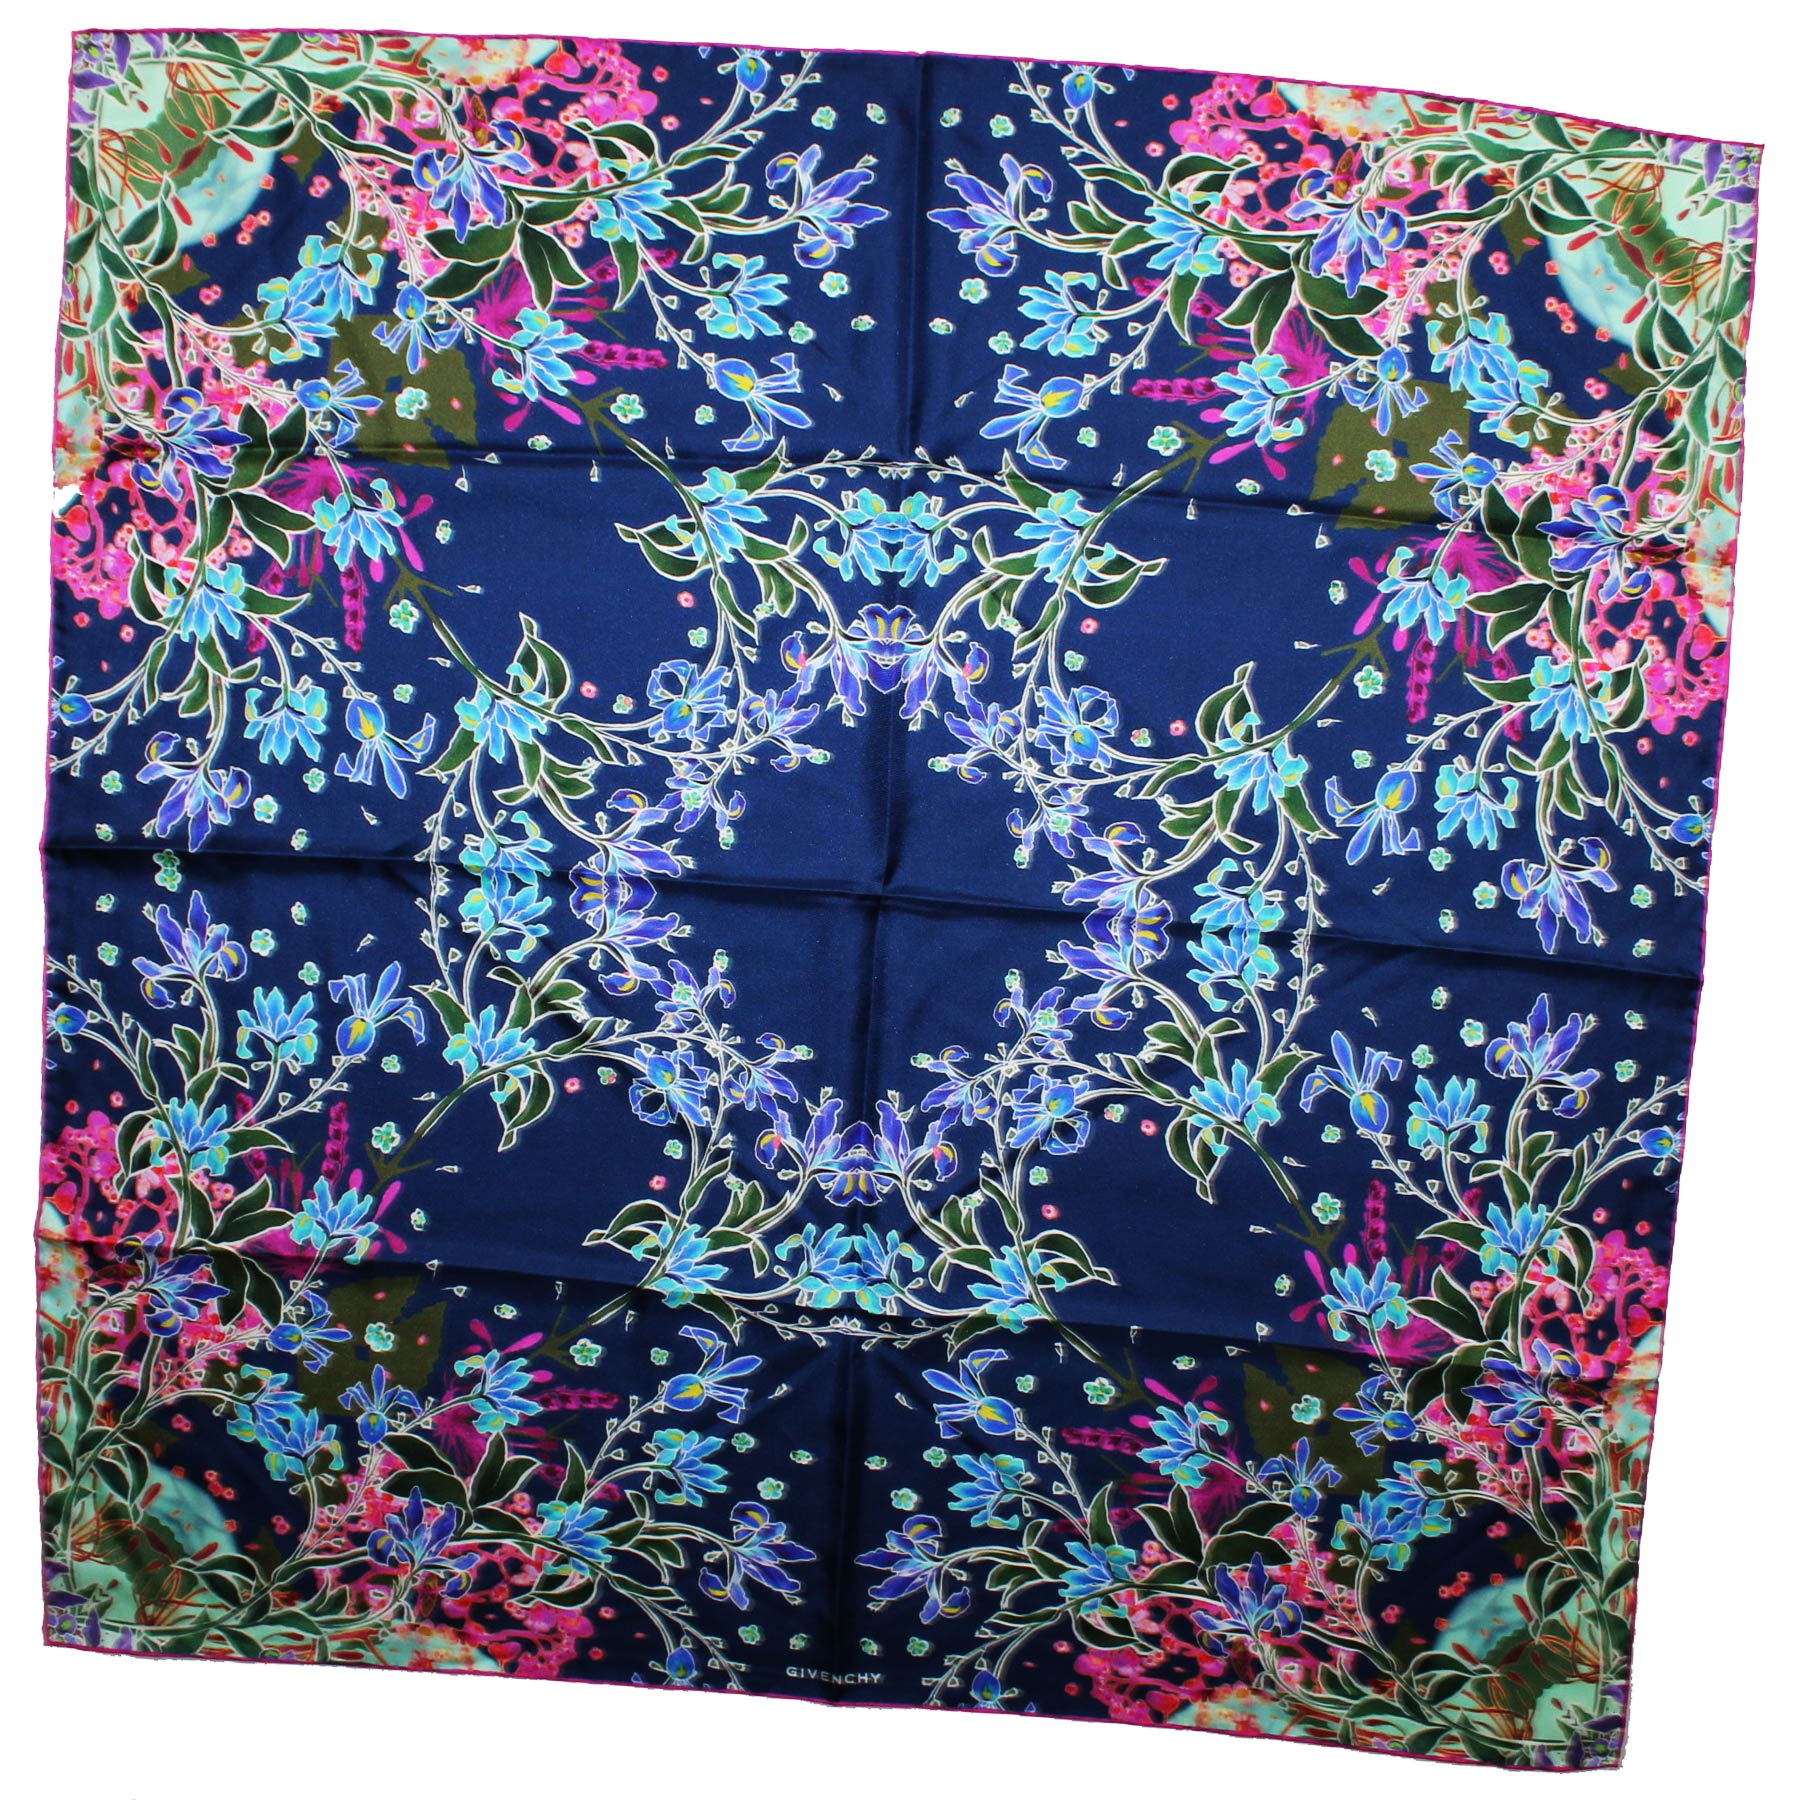 Givenchy Scarf Green Blue Pink Floral - Large Square Twill Silk Scarf